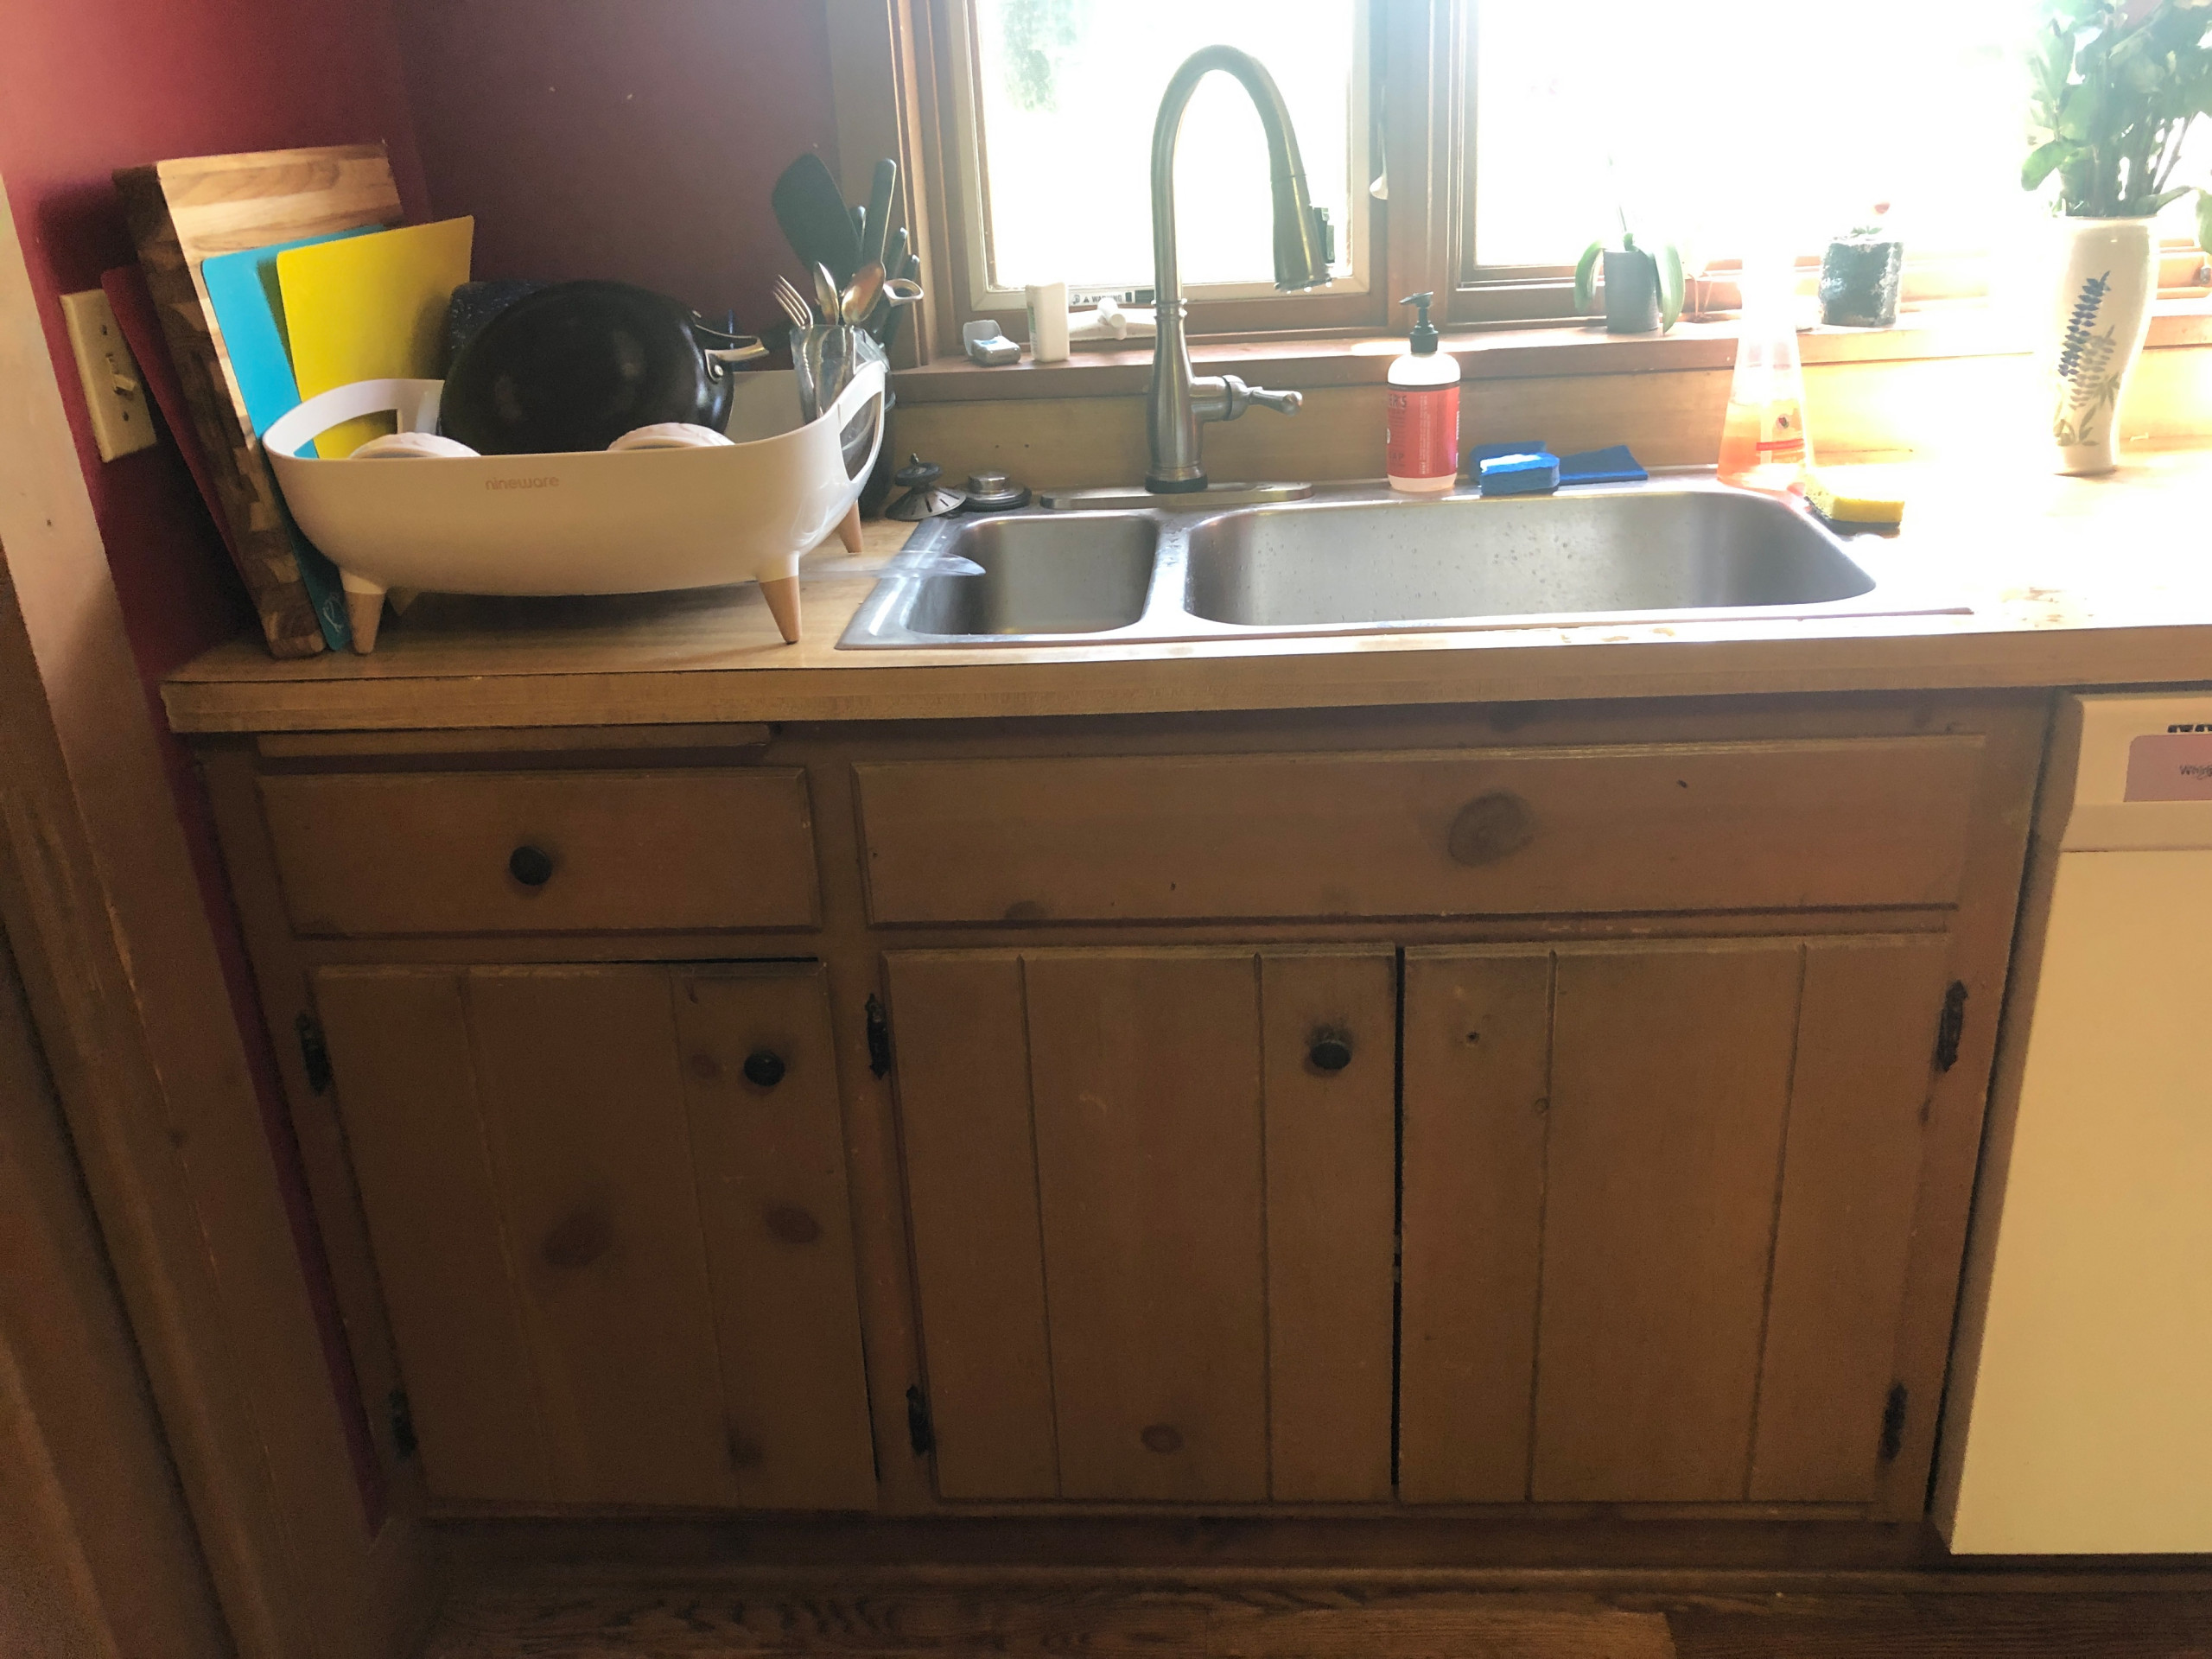 Kitchen remake with original cabinetry